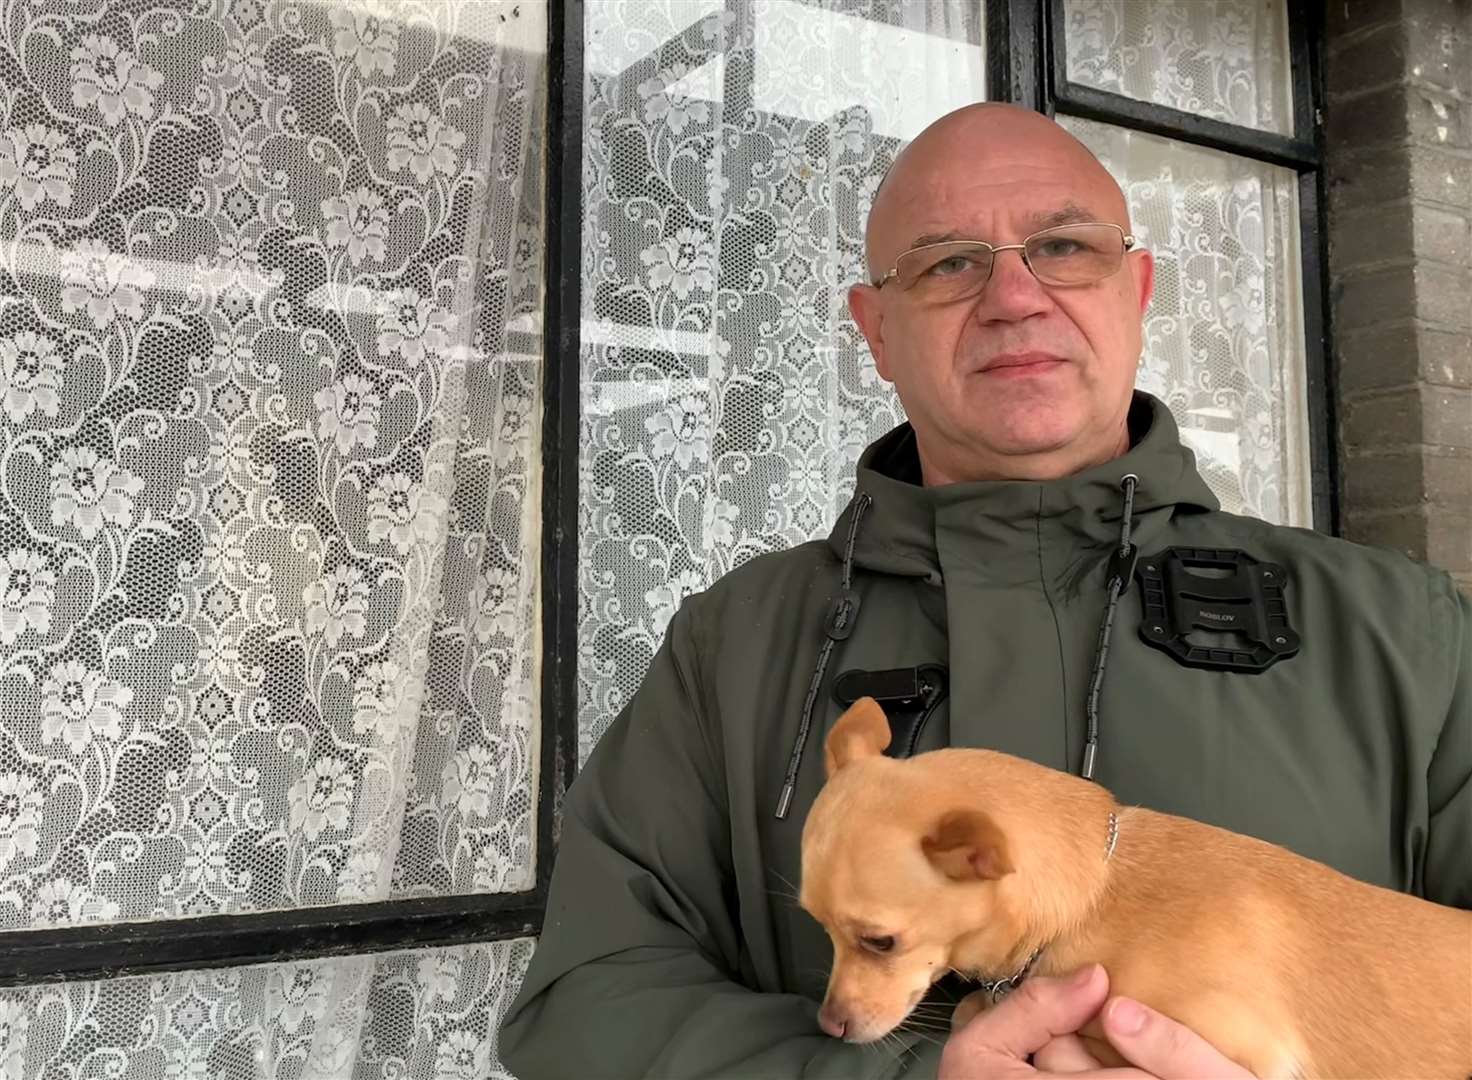 Margate resident Lyndon Brand, pictured with his dog Charlie, says Arlington House's windows are in disrepair